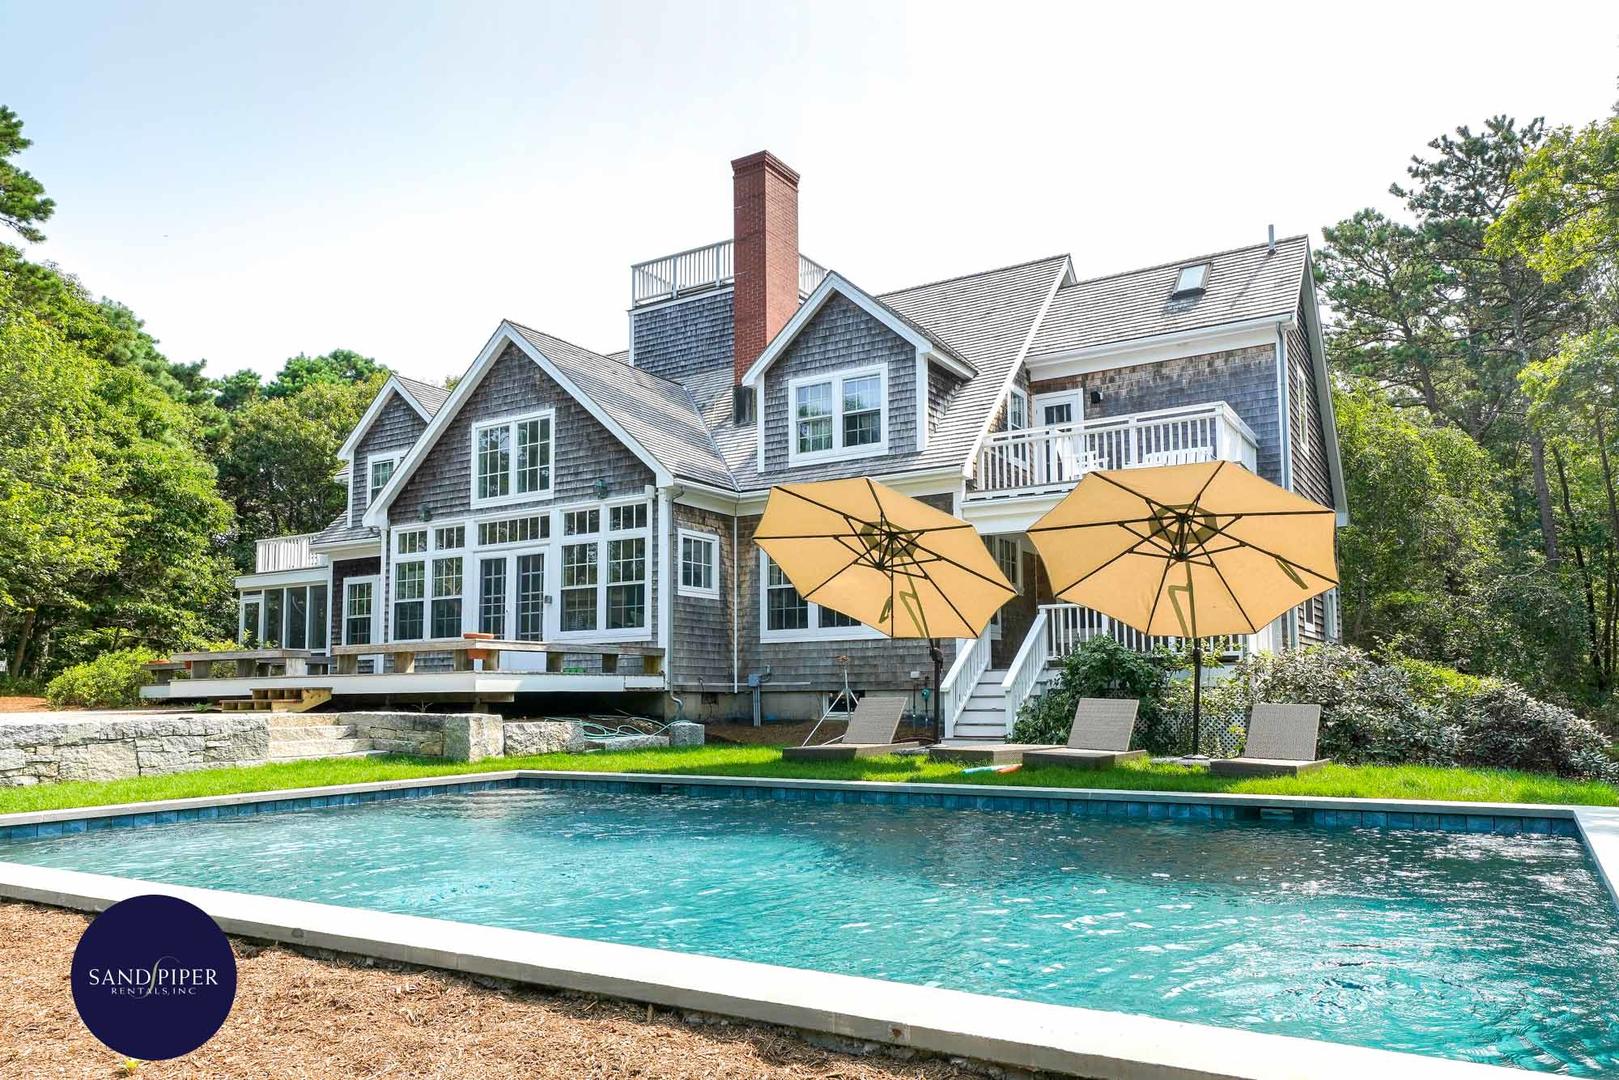 Vineyard Haven 1256 Accommodations In Marthas Vineyard With Large Pool And 5 Bedrooms 128436 Find Rentals